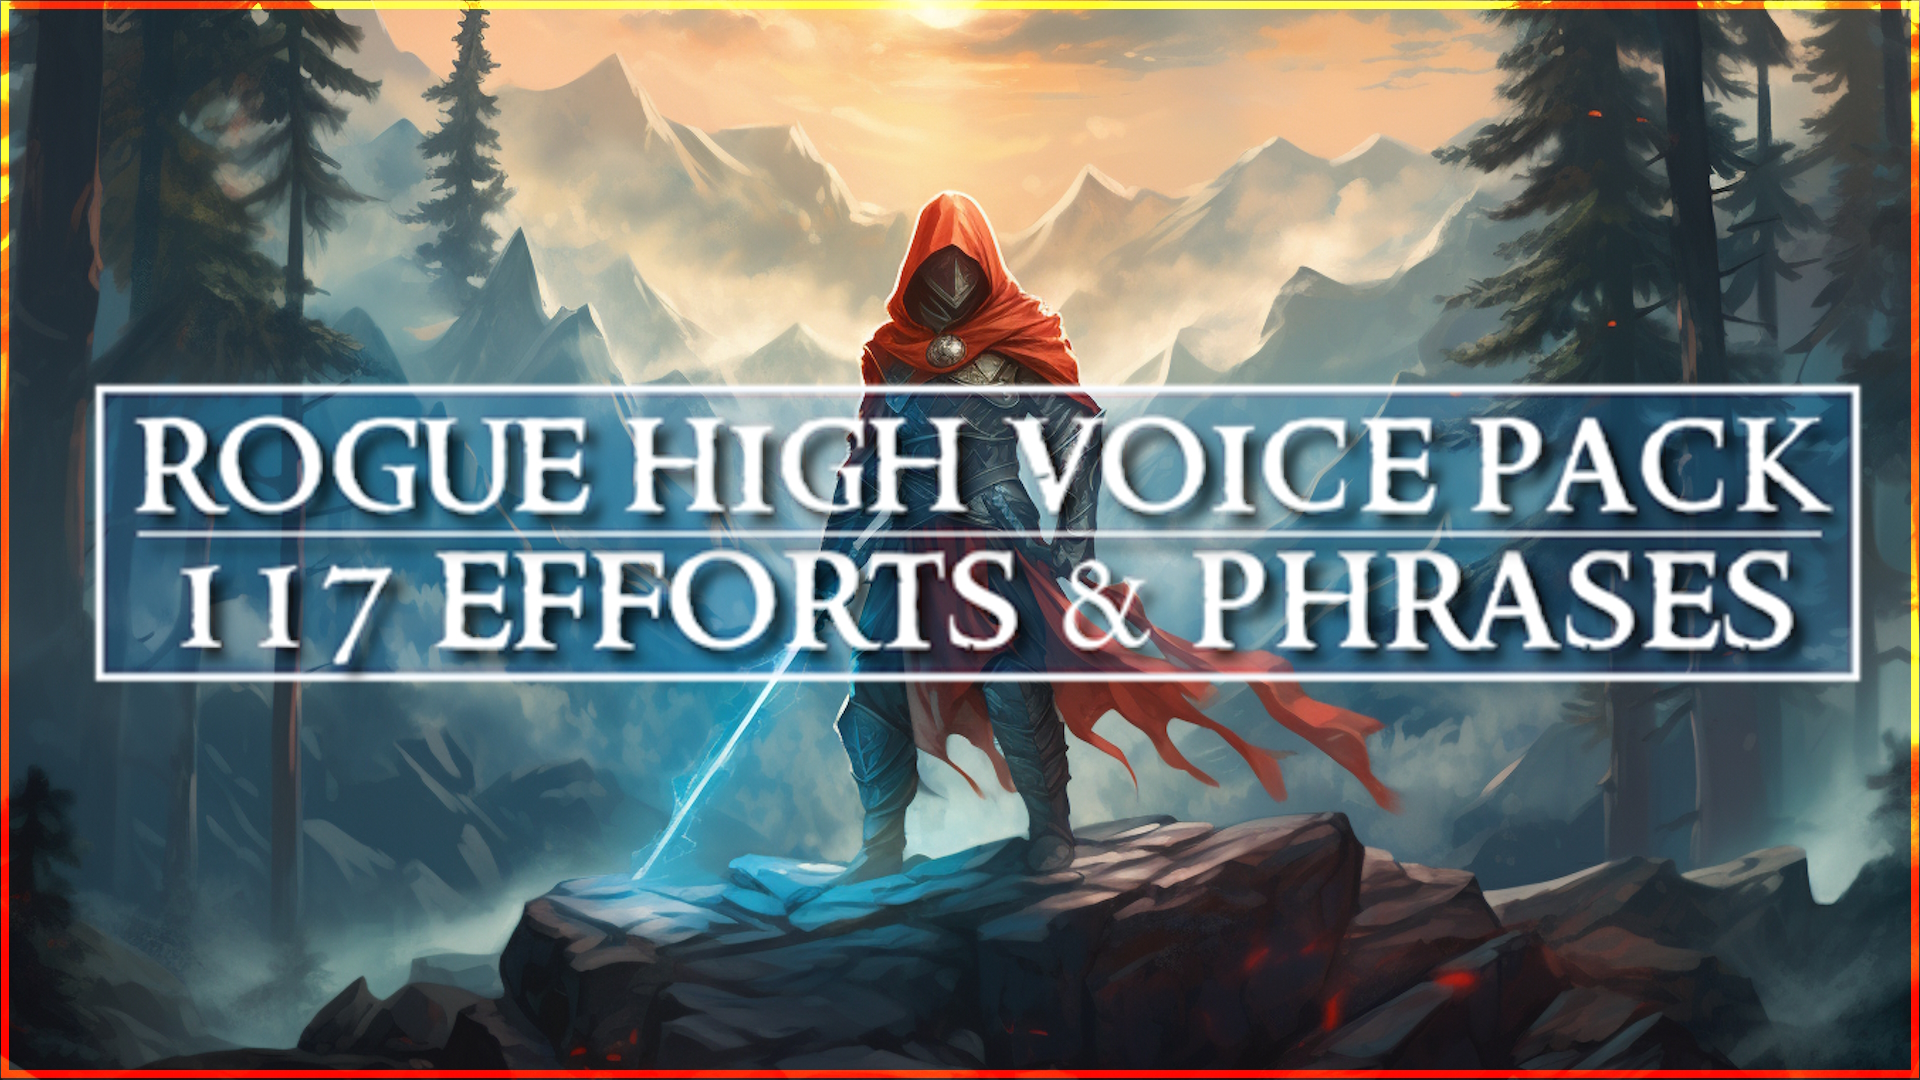 Rogue High Voice Pack 117 Efforts and Phrases